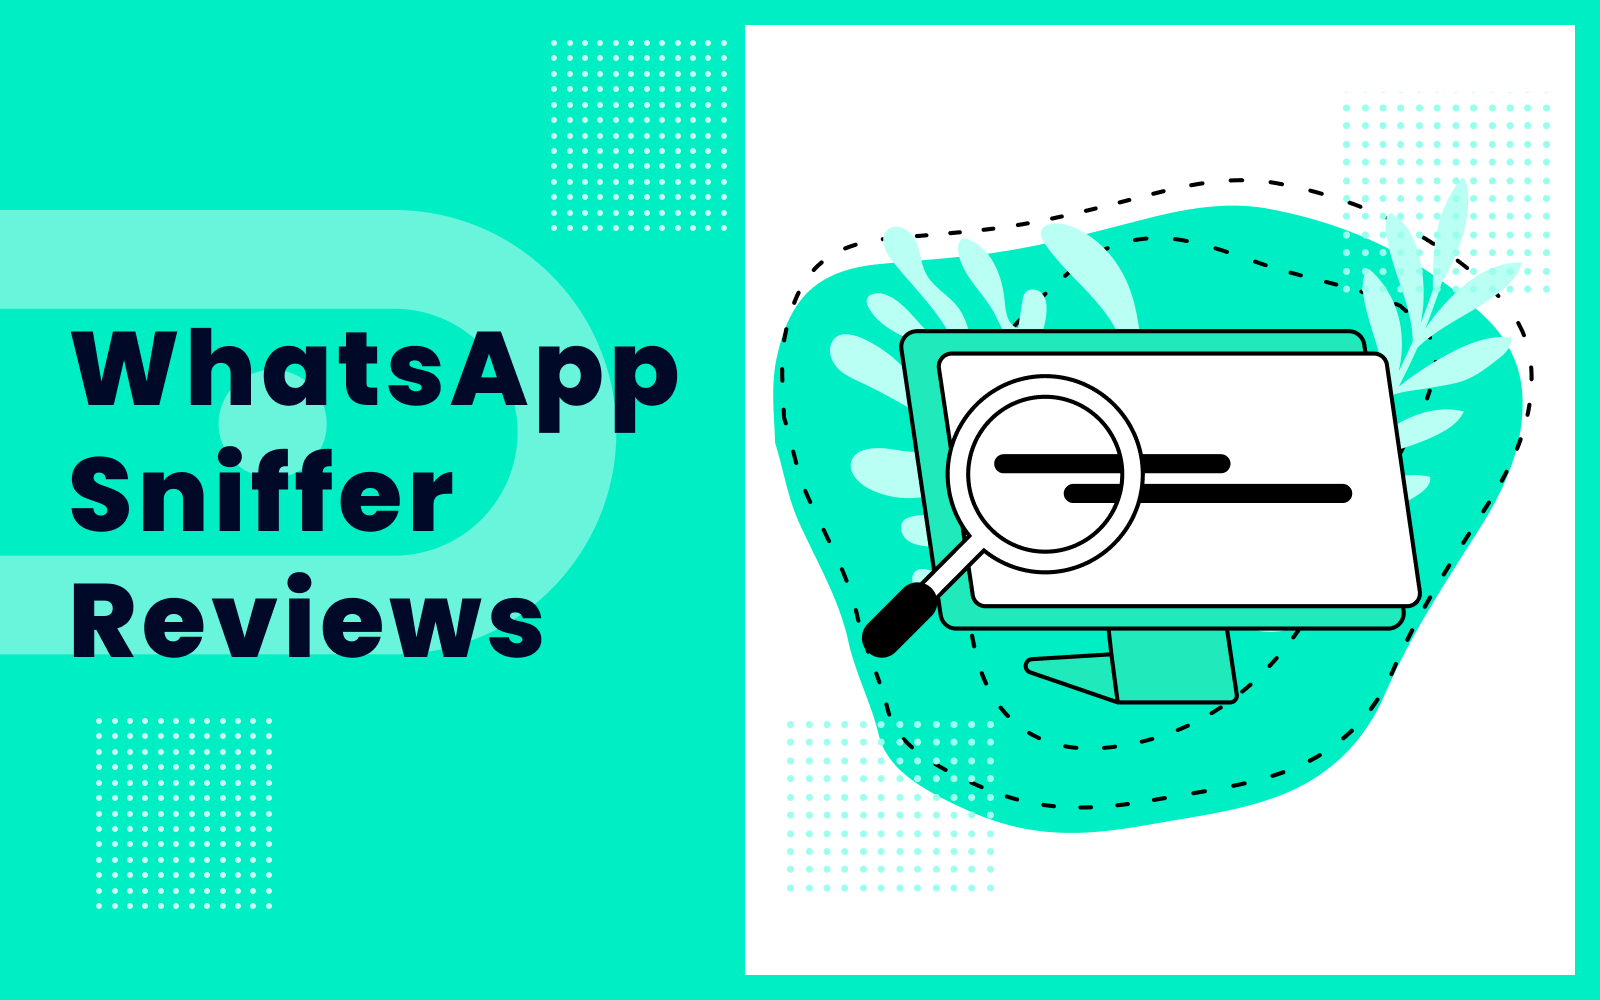 WhatsApp Sniffer Reviews 2022: Does the App Still Work?